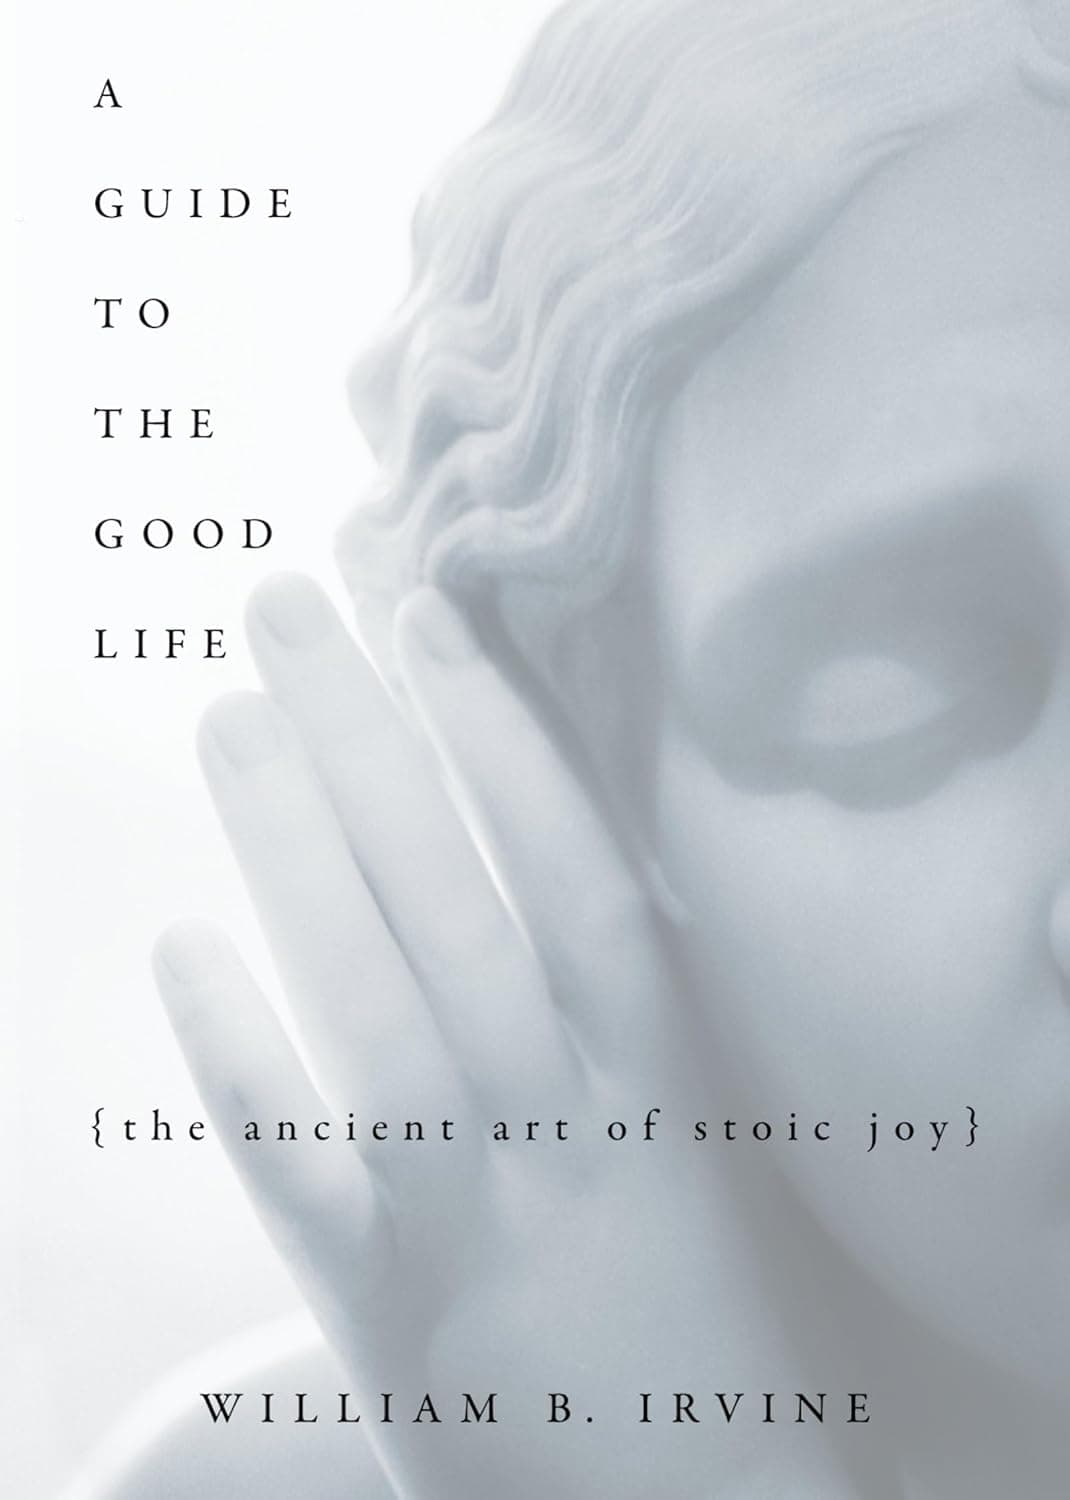 A Guide to the Good Life: The Ancient Art of Stoic Joy by William Irvine